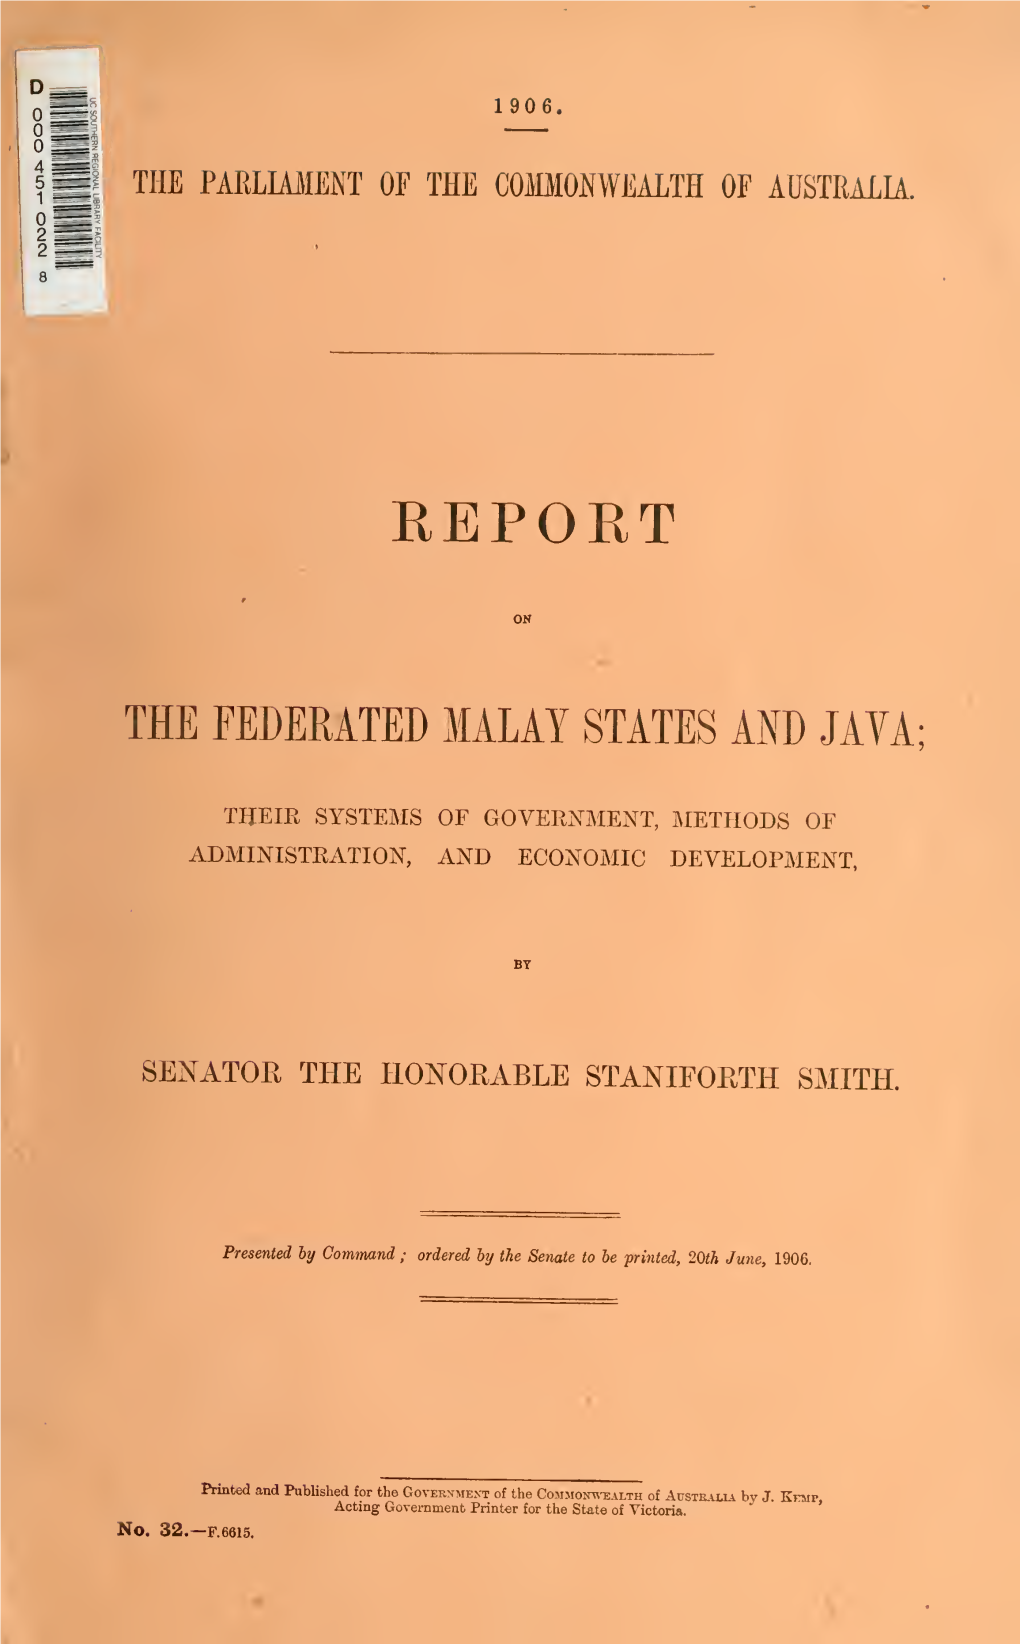 Report on the Federated Malay States and Java